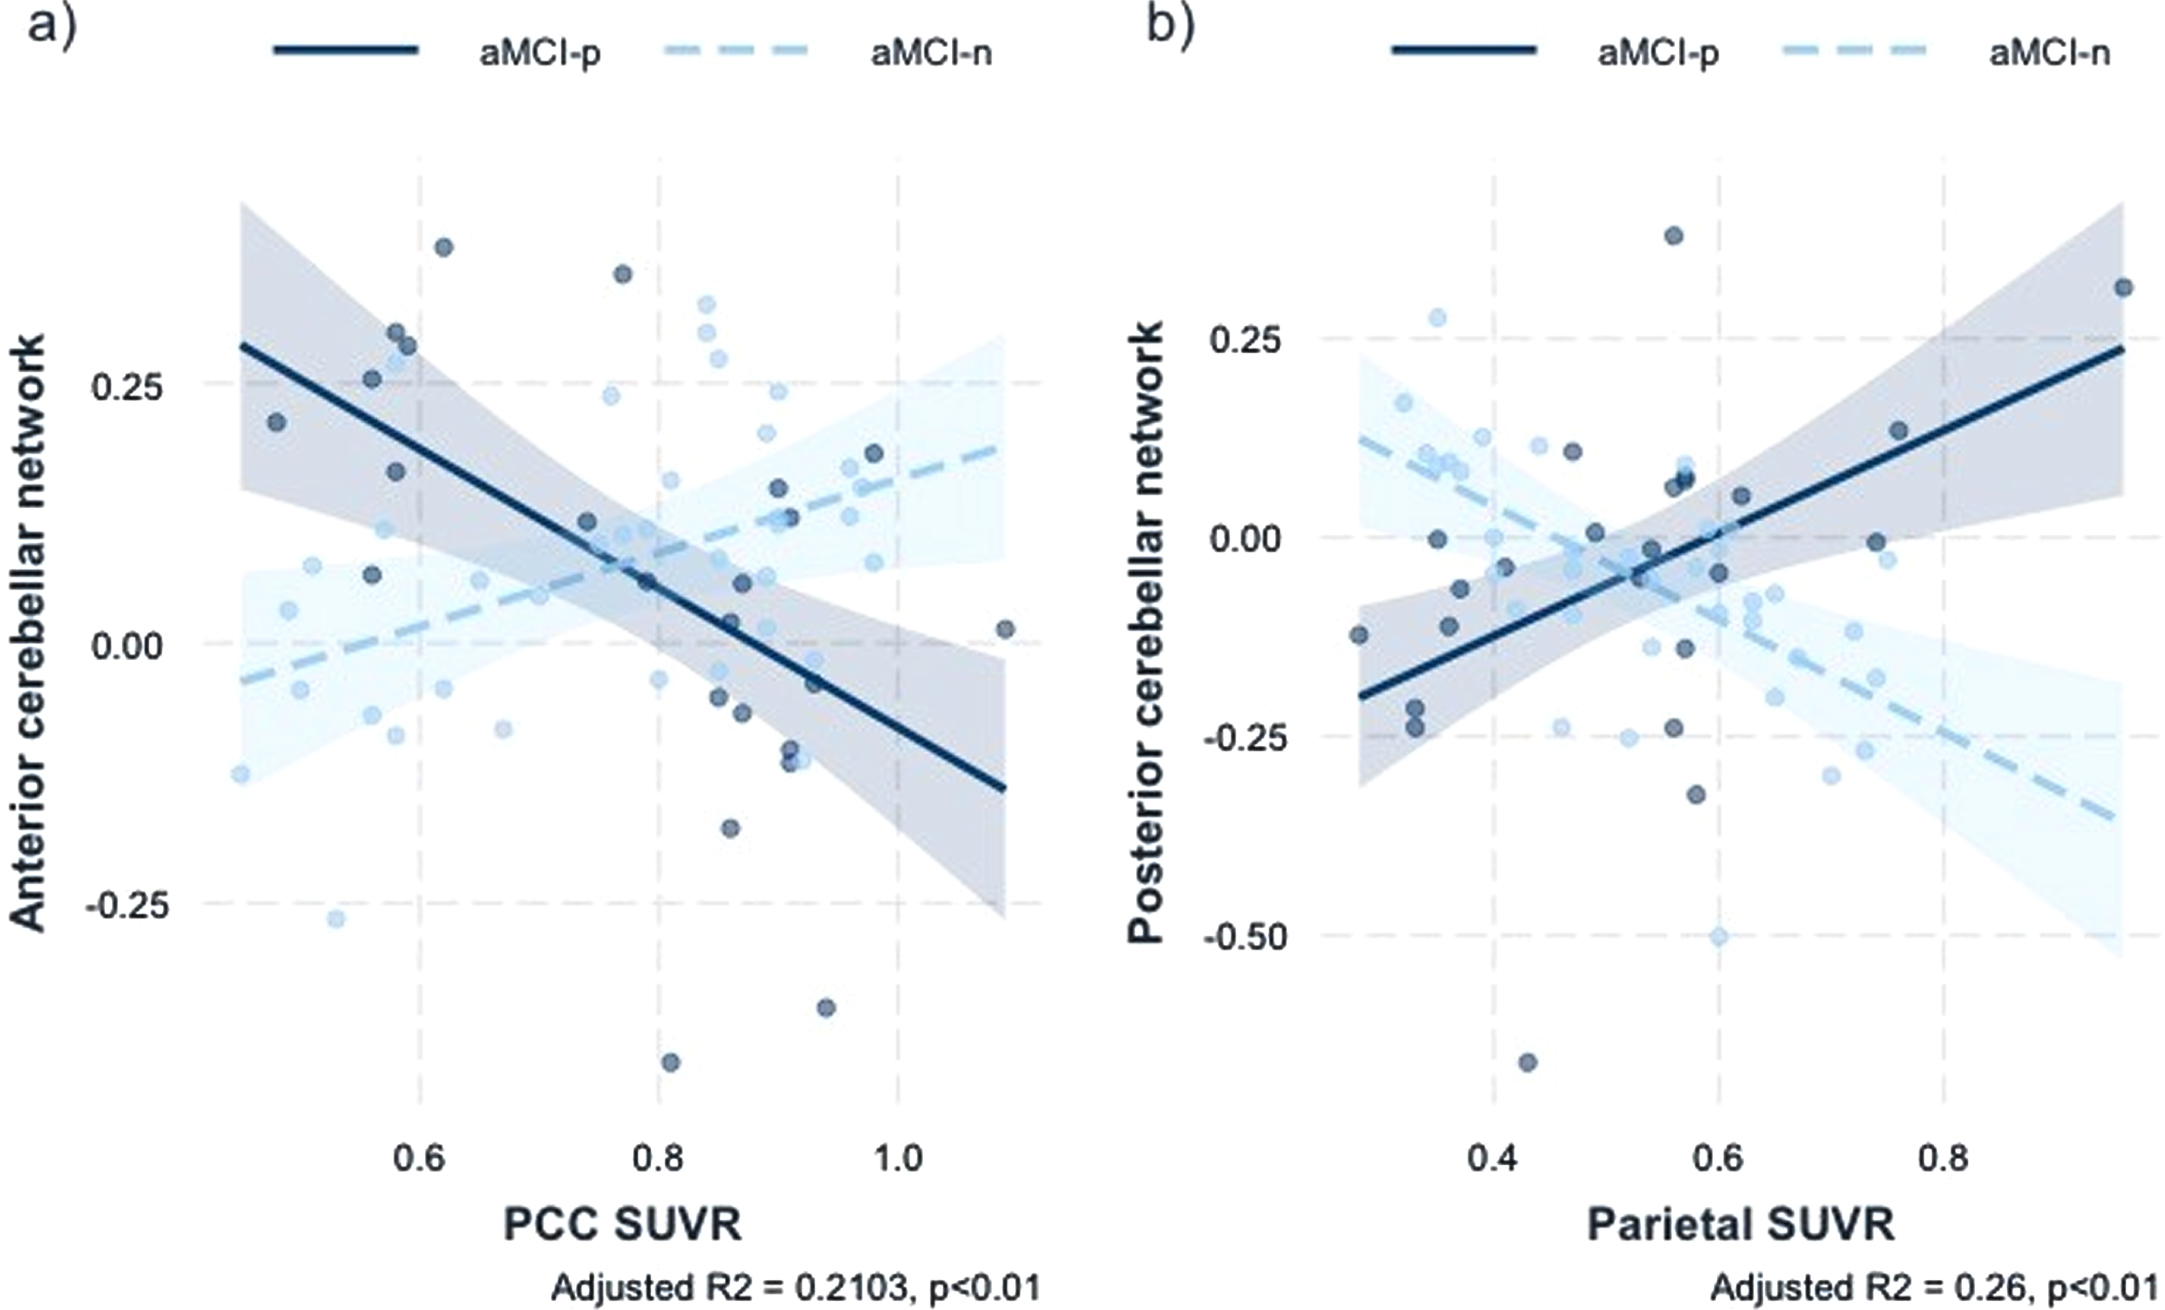 a) Association anterior cerebellar network rsFC with the interaction of sleep latency and PCC SUVR b) Association of posterior cerebellar network rsFC with the interaction of sleep latency and parietal SUVR. SUVR, standardized uptake value ratio; rsFC, resting-state functional connectivity; aMCI-p, amnestic mild cognitive impairment patients with prolonged sleep latency; aMCI-n, amnestic mild cognitive impairment patients with normal sleep latency.